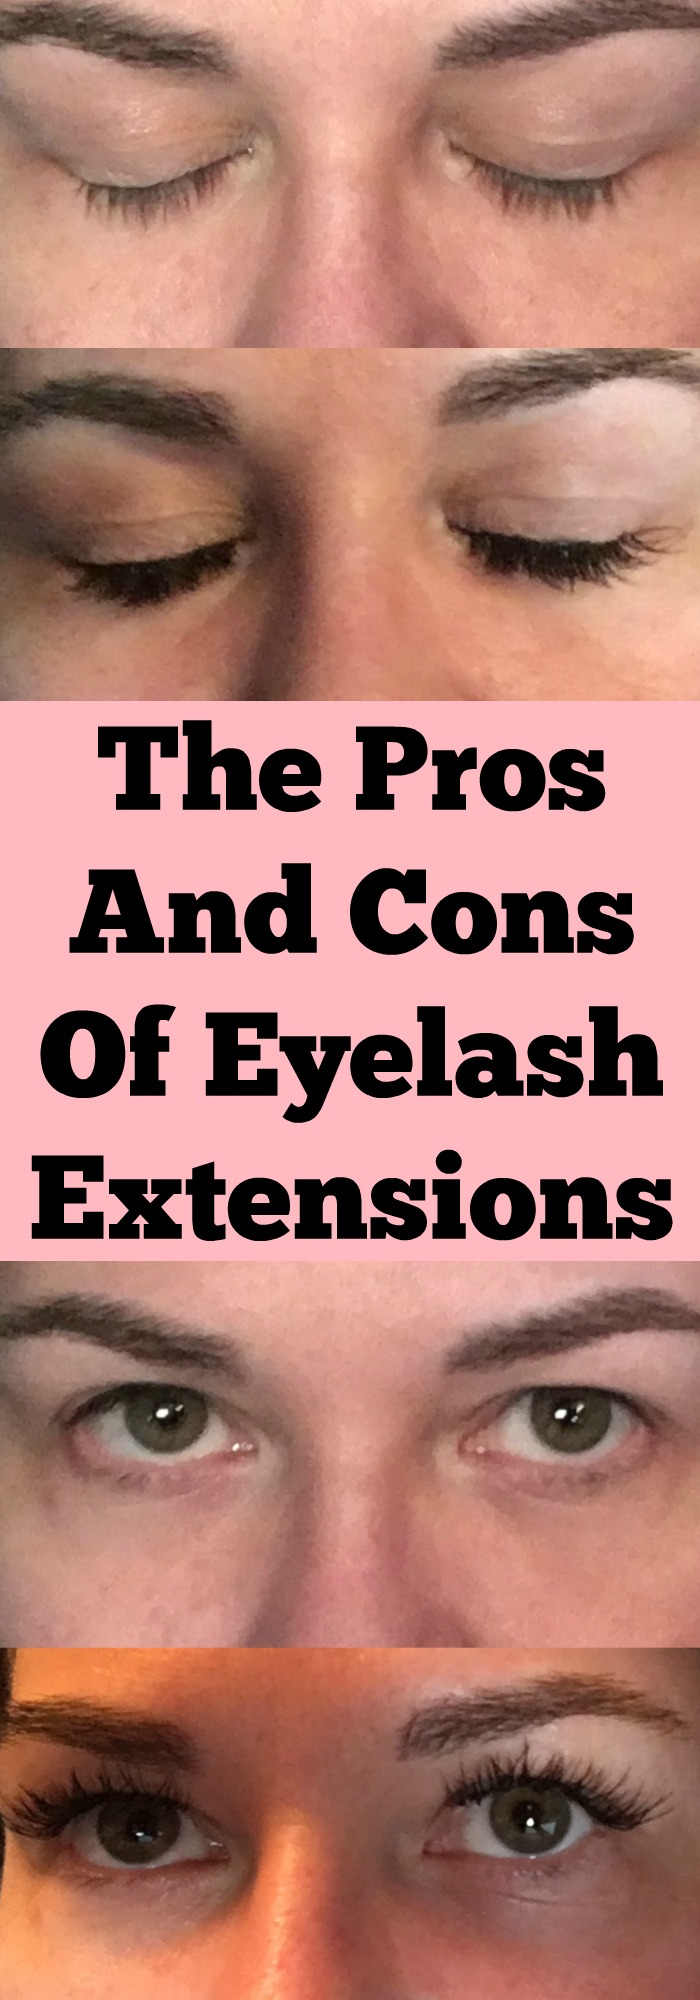 The Pros And Cons Of Eyelash Extensions